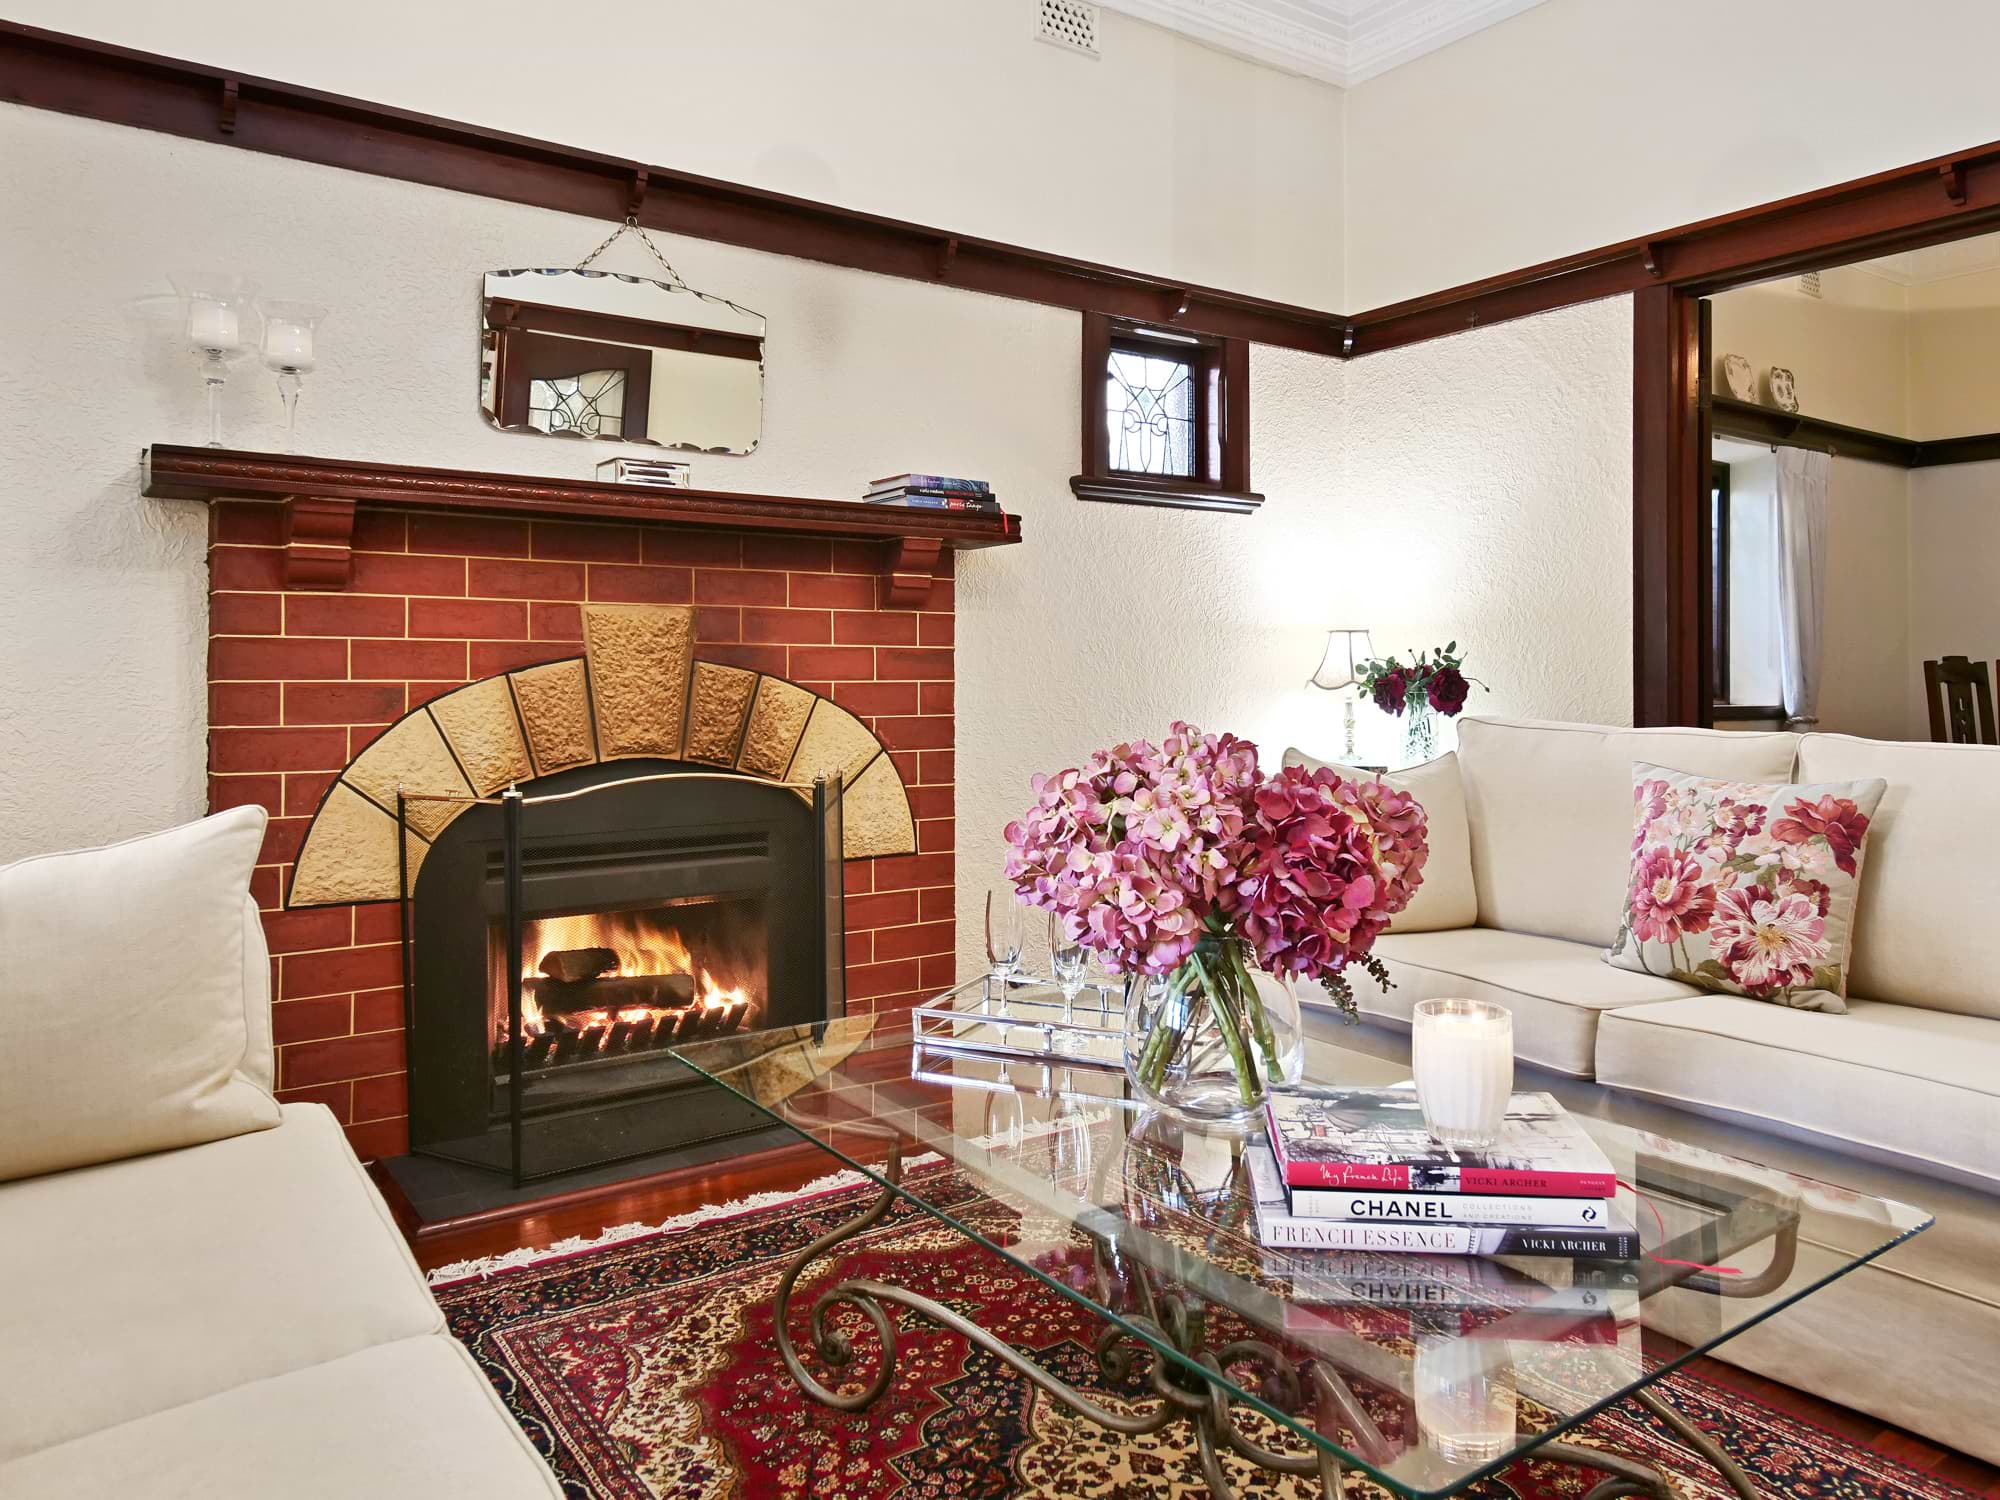 Living room of Kensington, Perth property with fireplace and flowers on glass coffee table